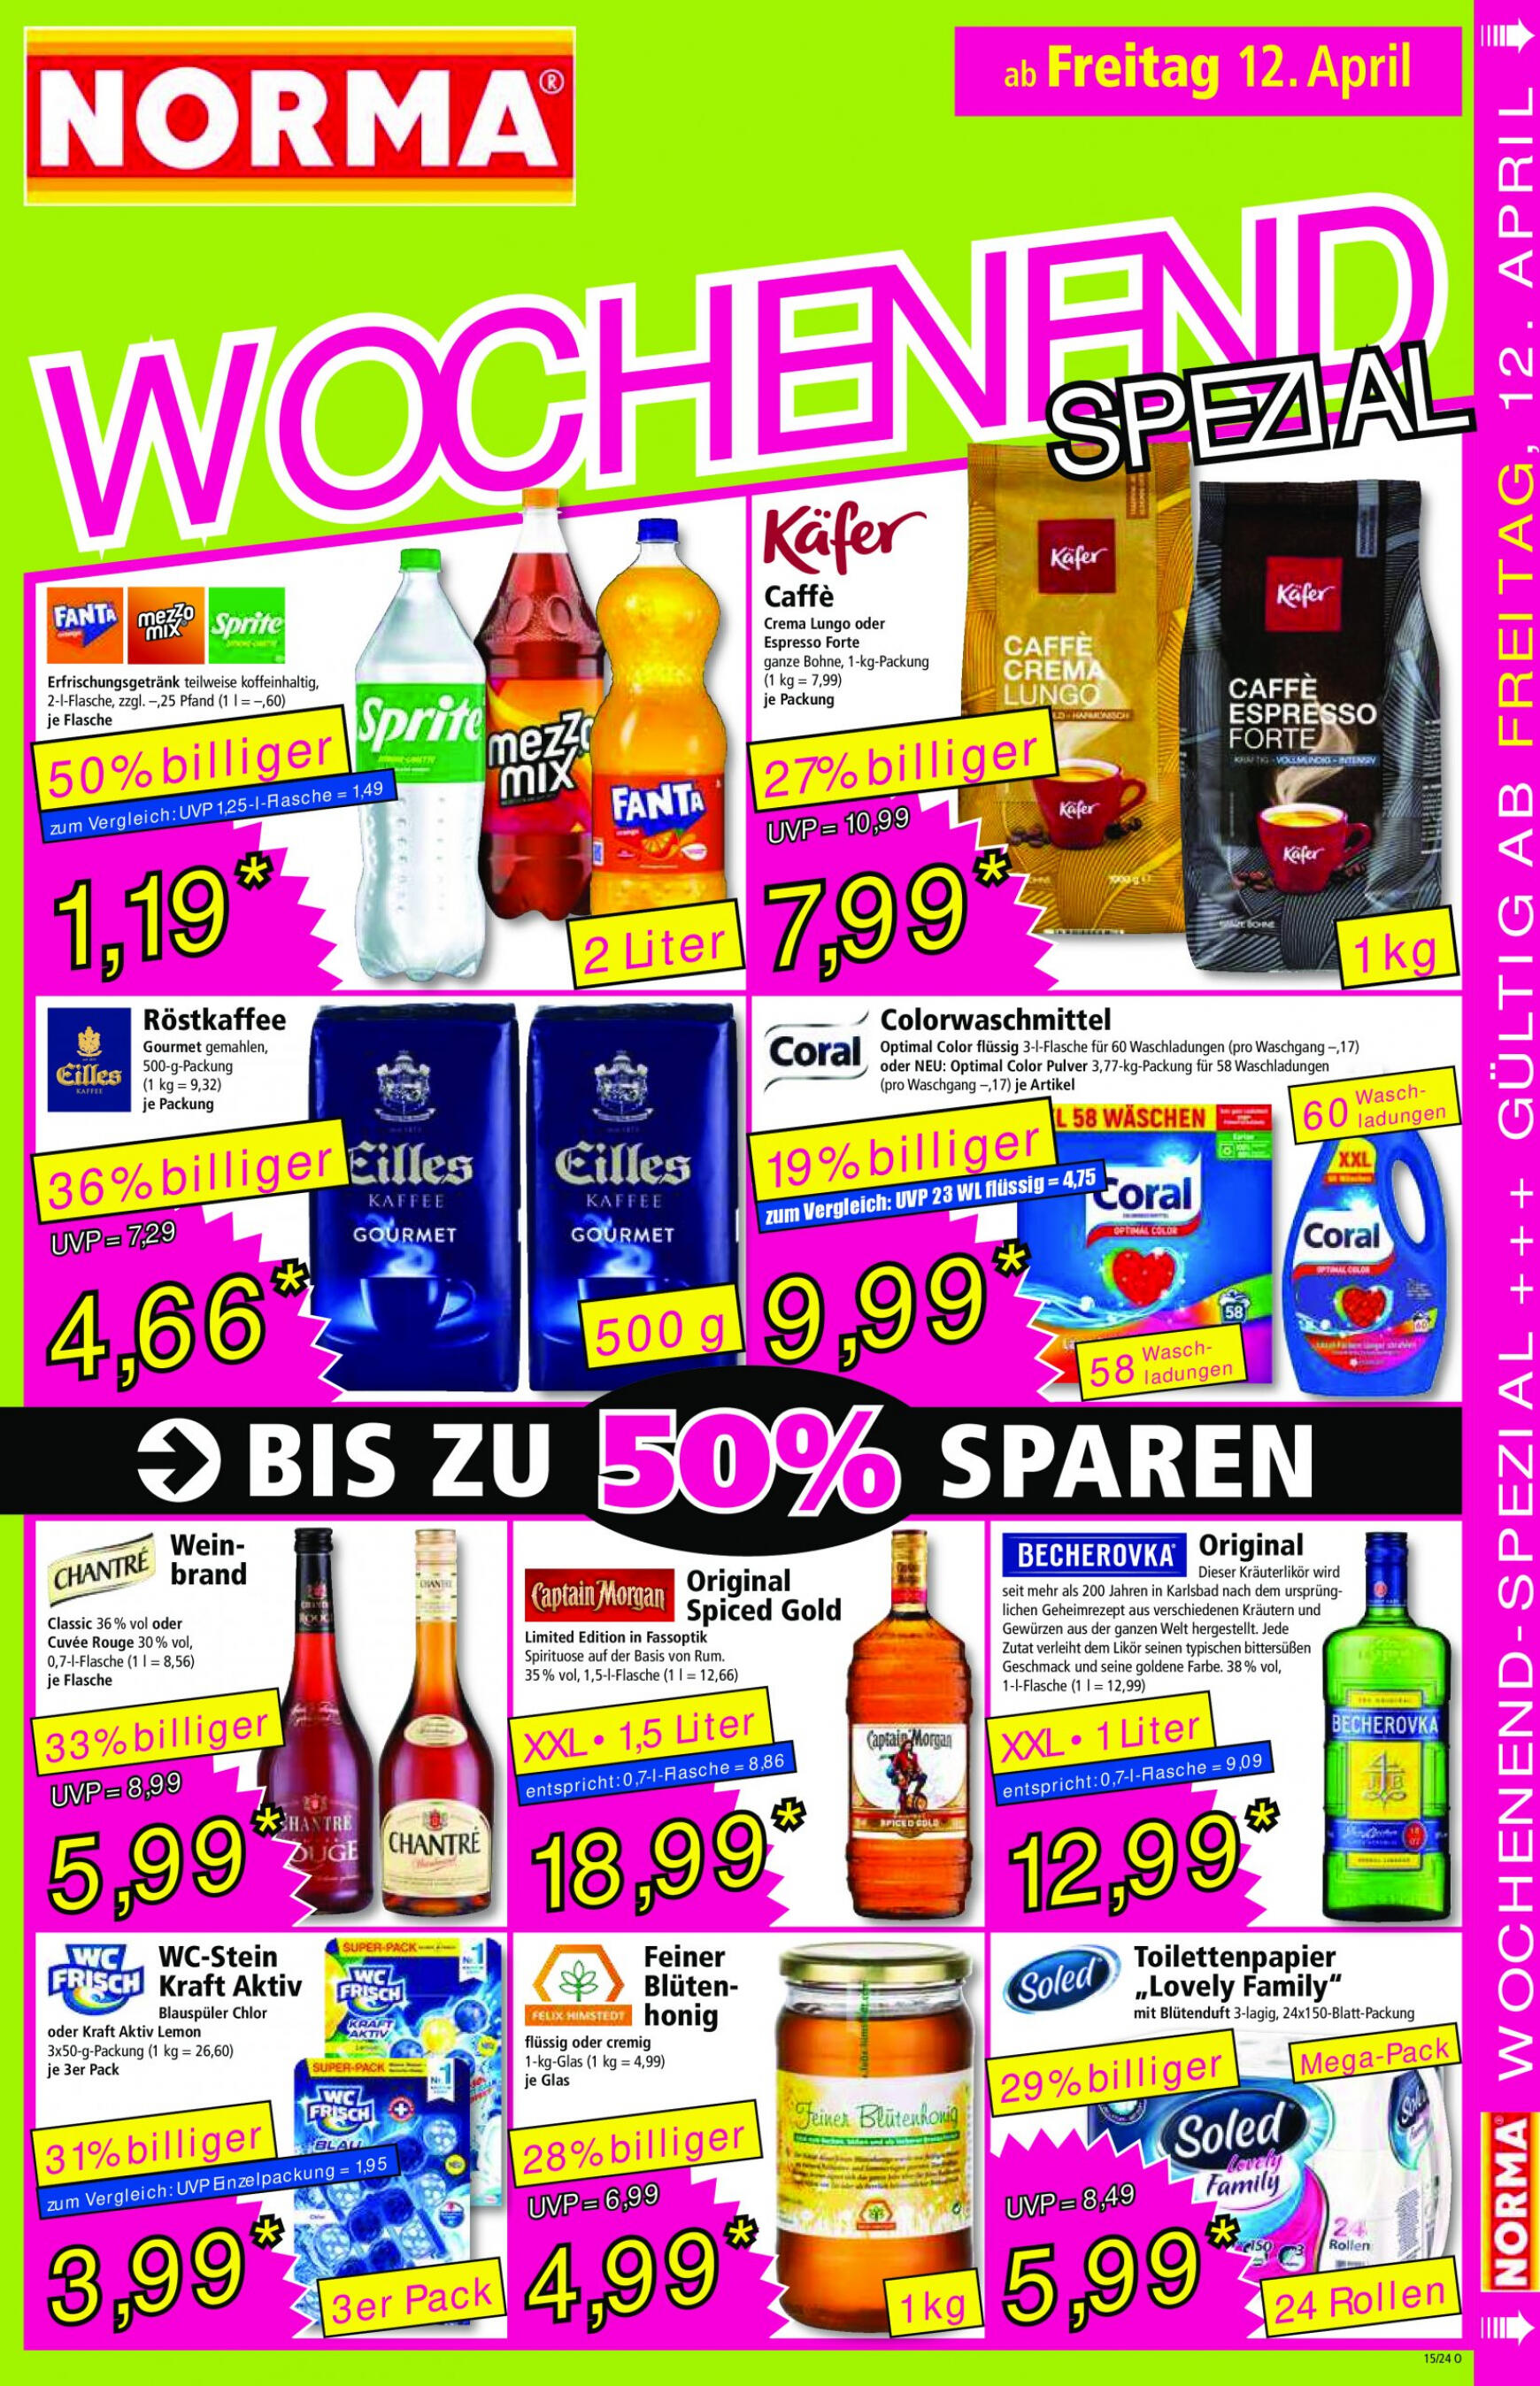 norma - Flyer Norma aktuell 08.04. - 13.04. - page: 17